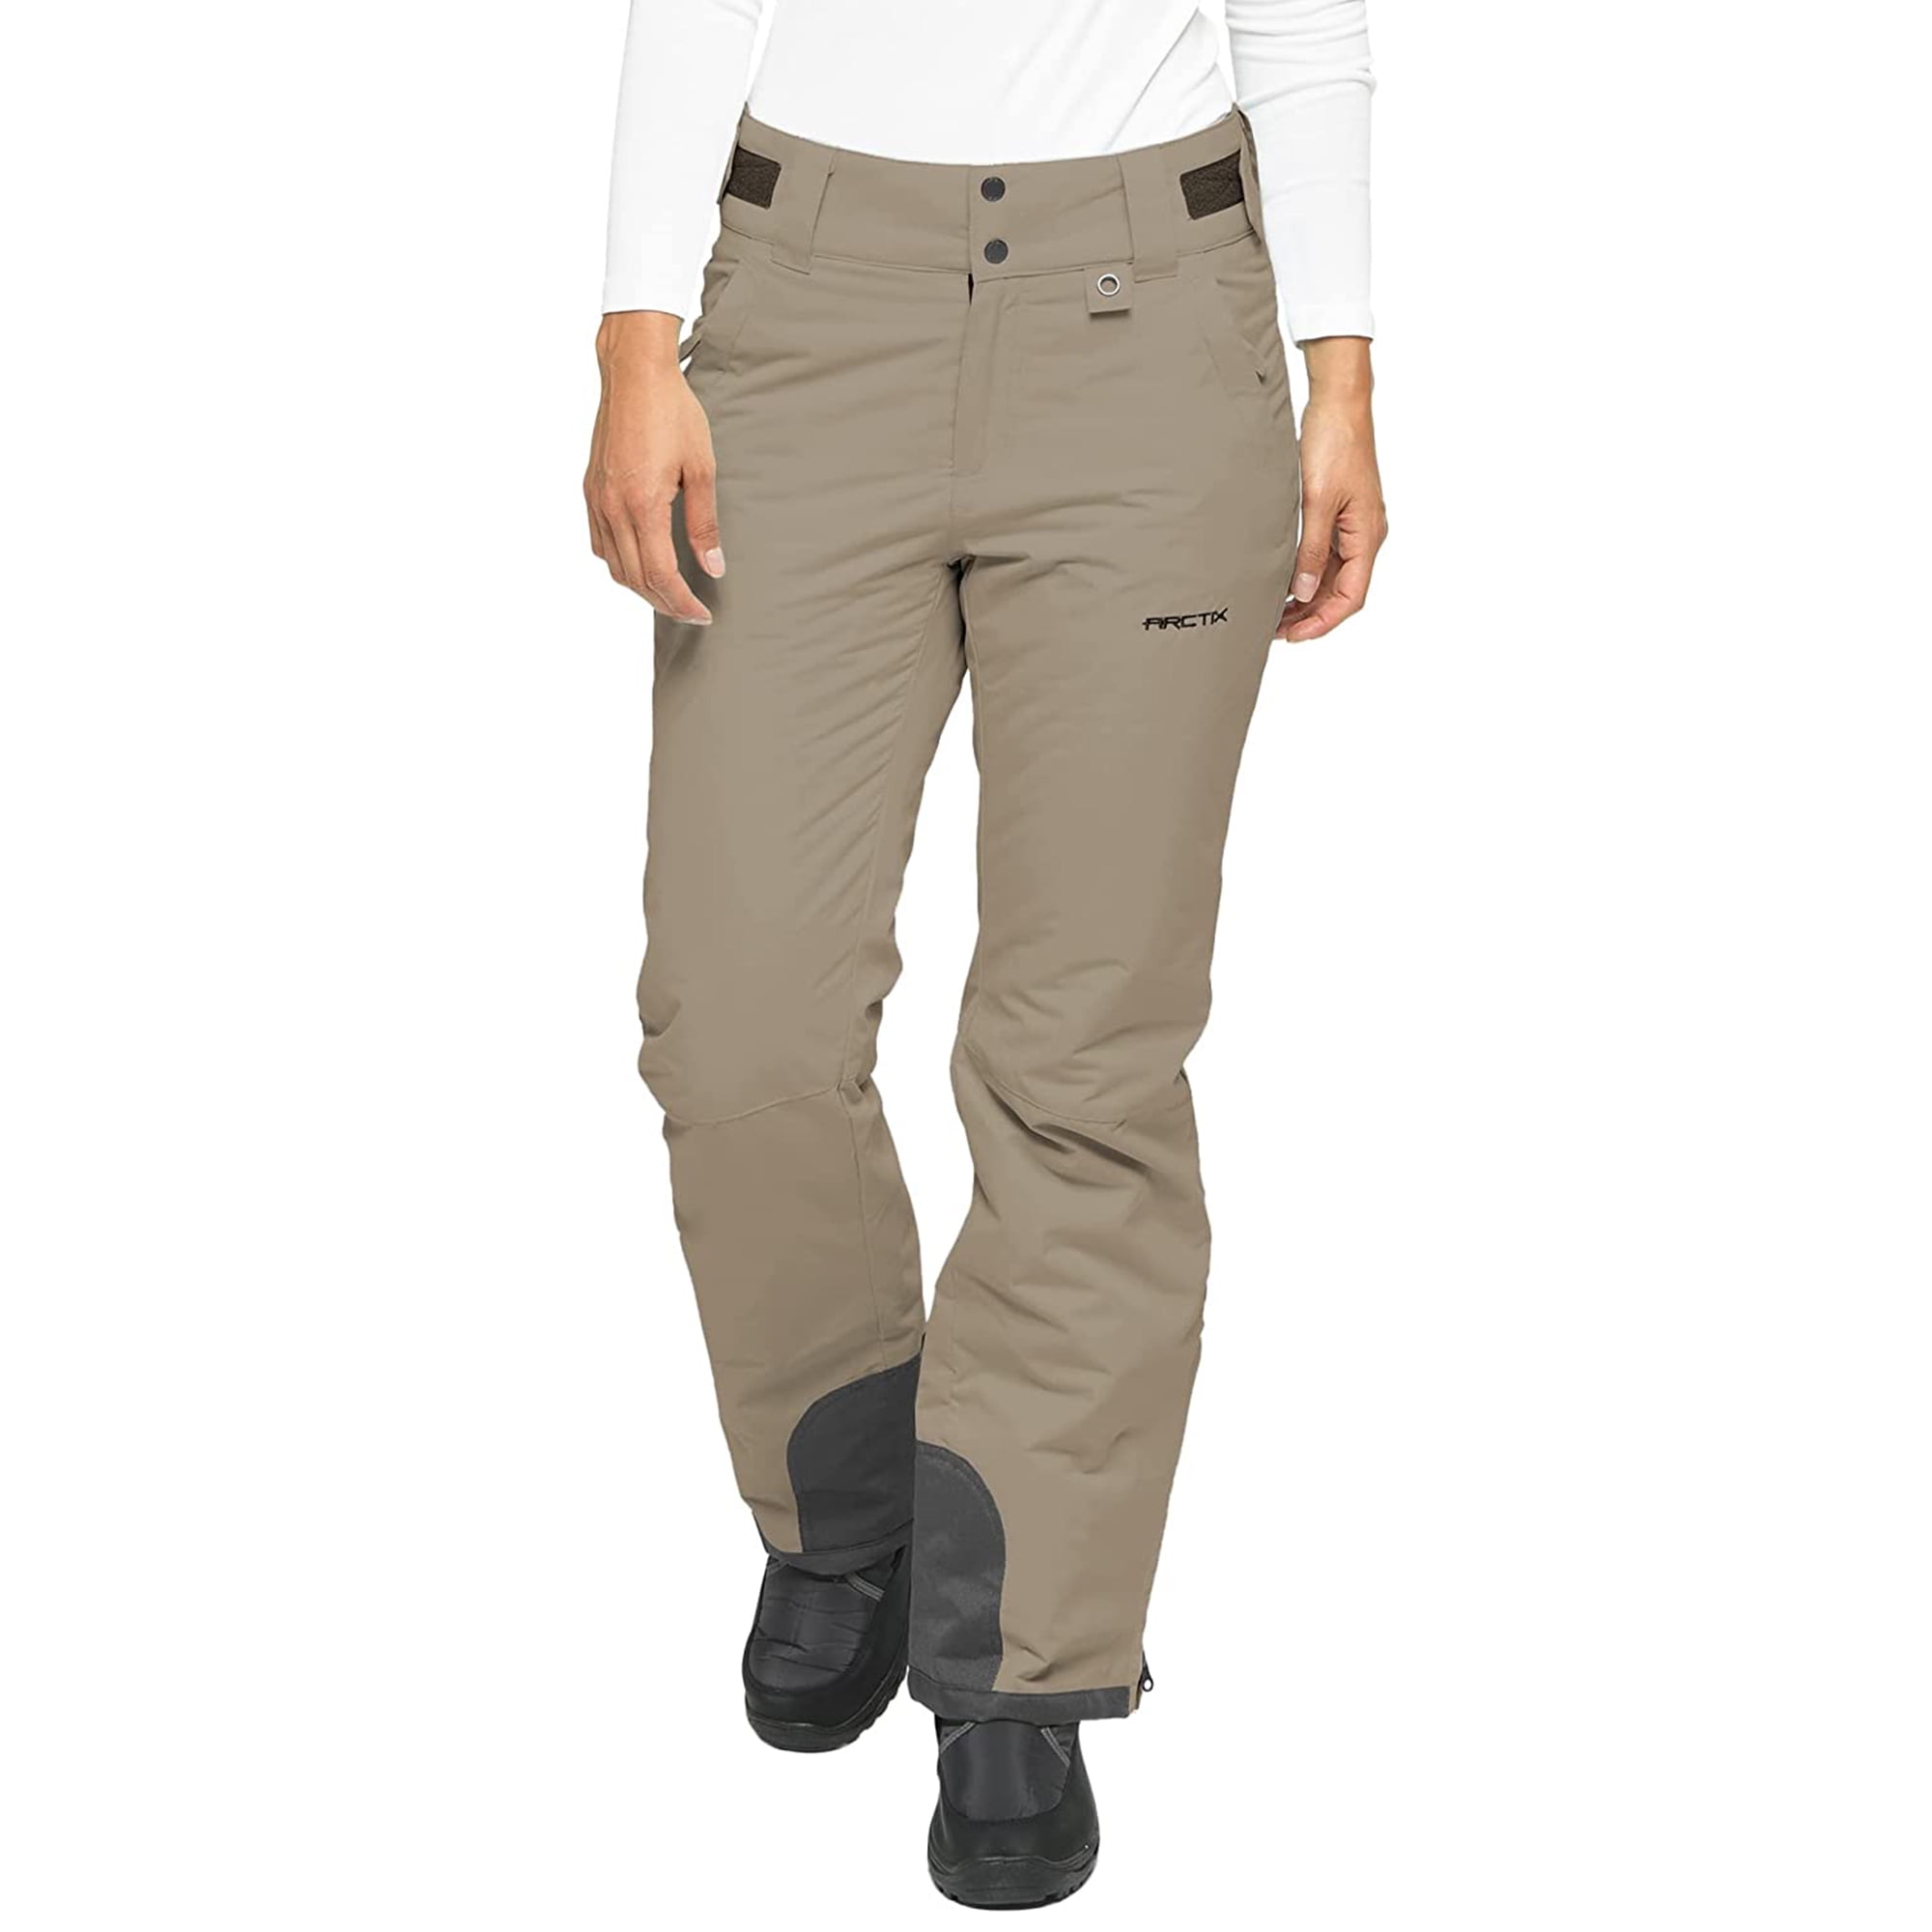 Arctix Insulated Winter Pants for Women Snow & Cold Weather Gear, Khaki ...